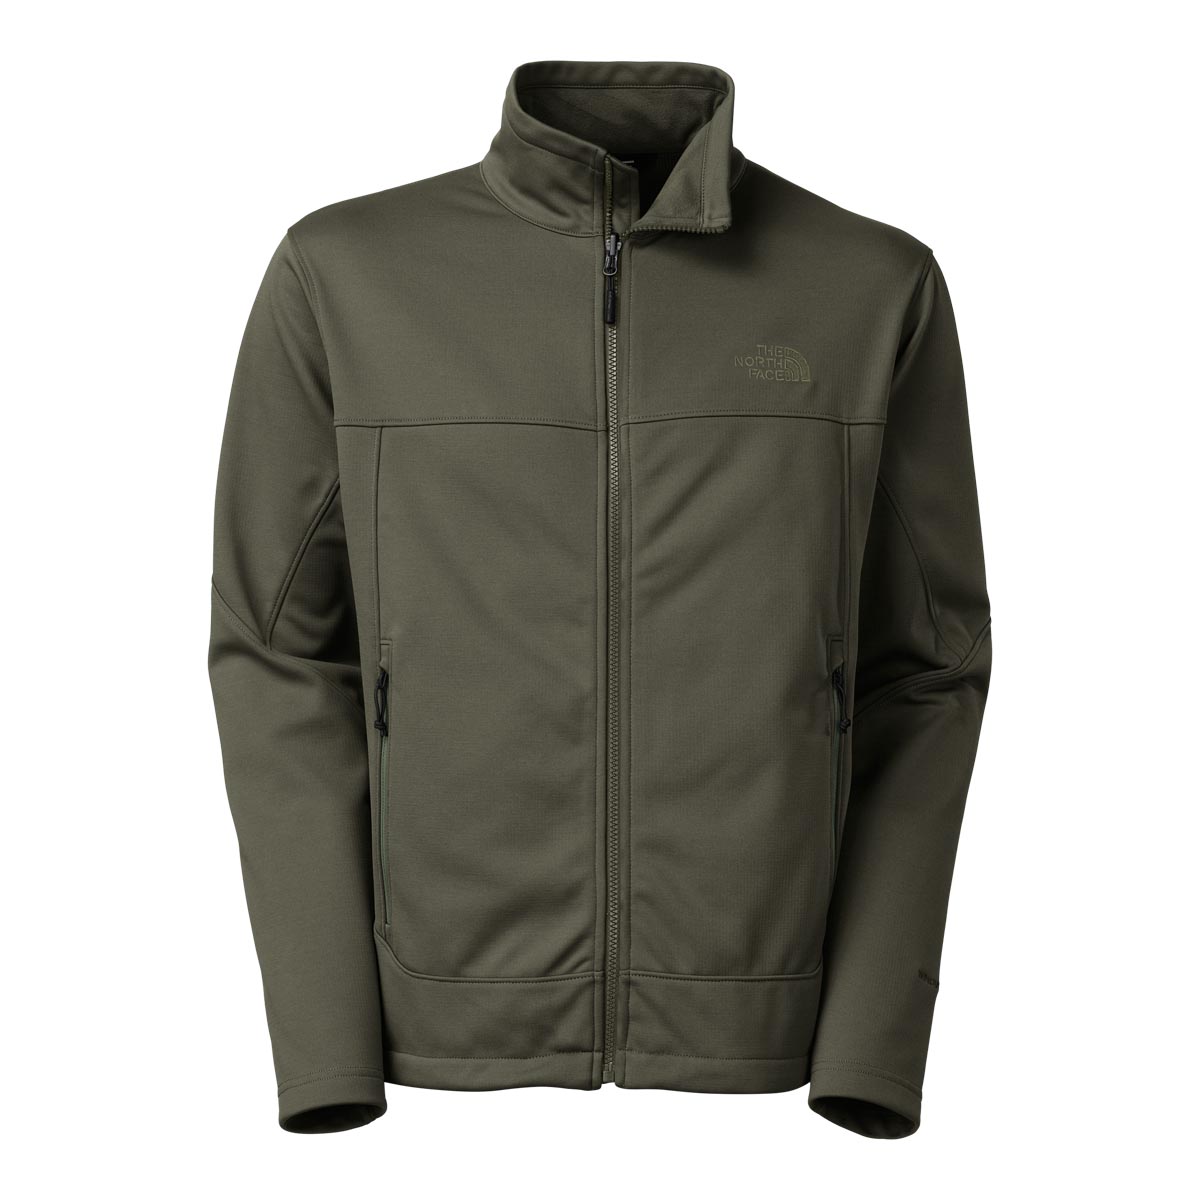 The North Face Men's Canyonwall Jacket Discontinued Pricing